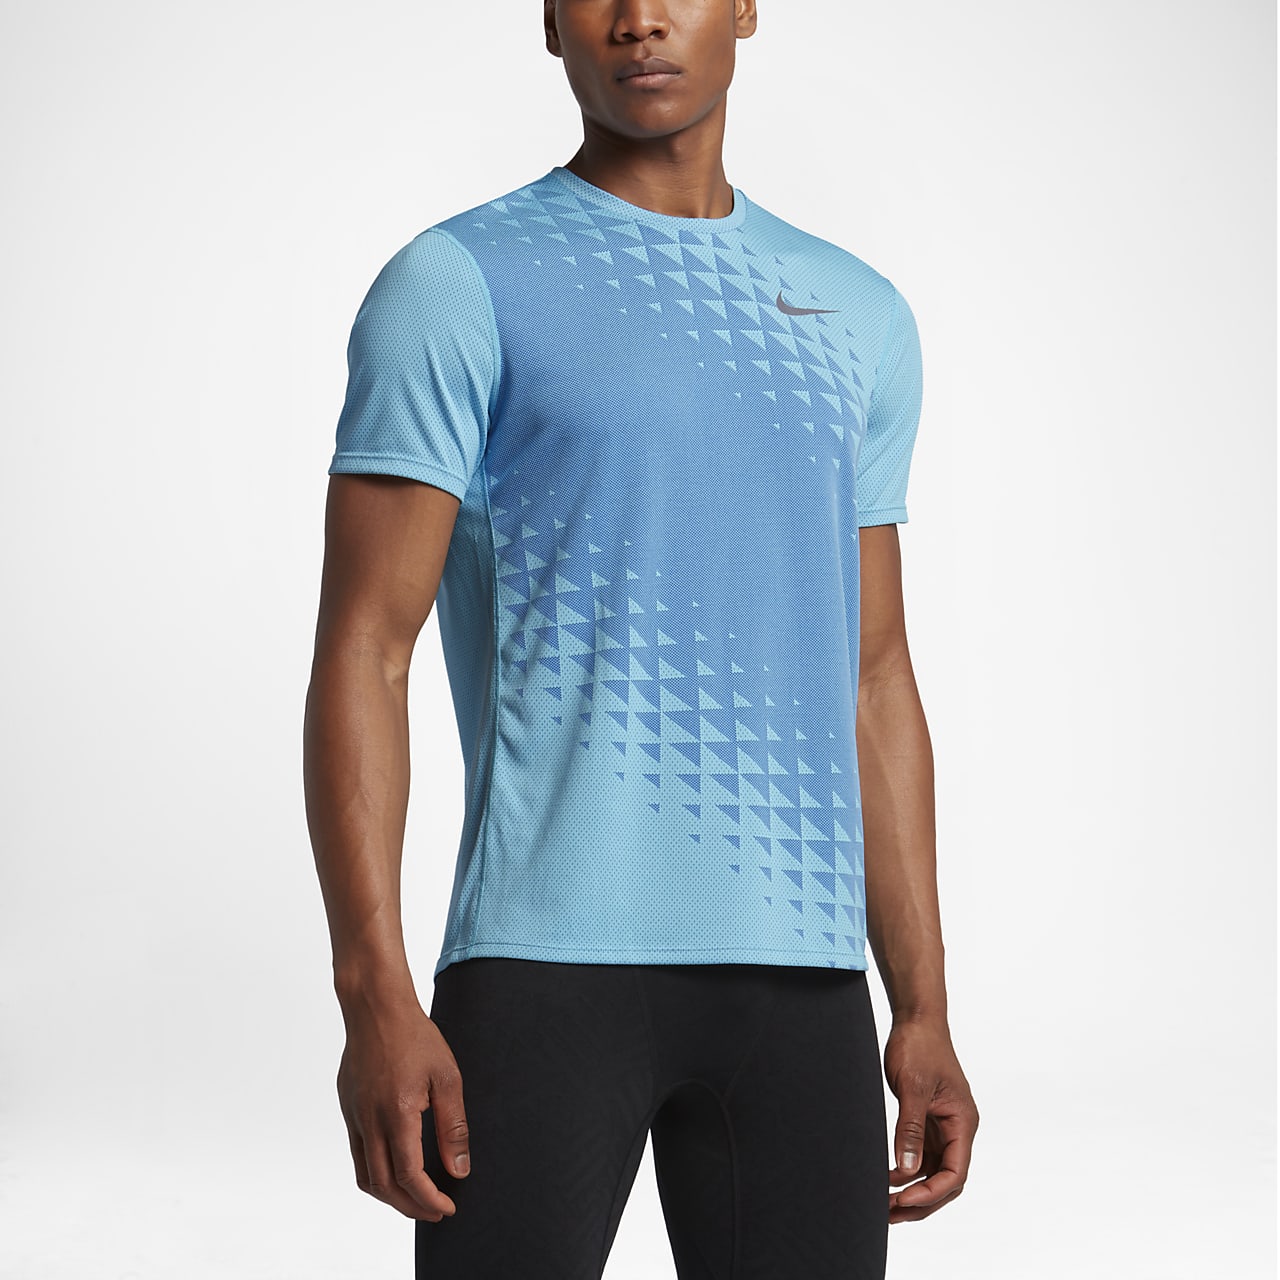 Nike Zonal Cooling Relay Graphic Men's 